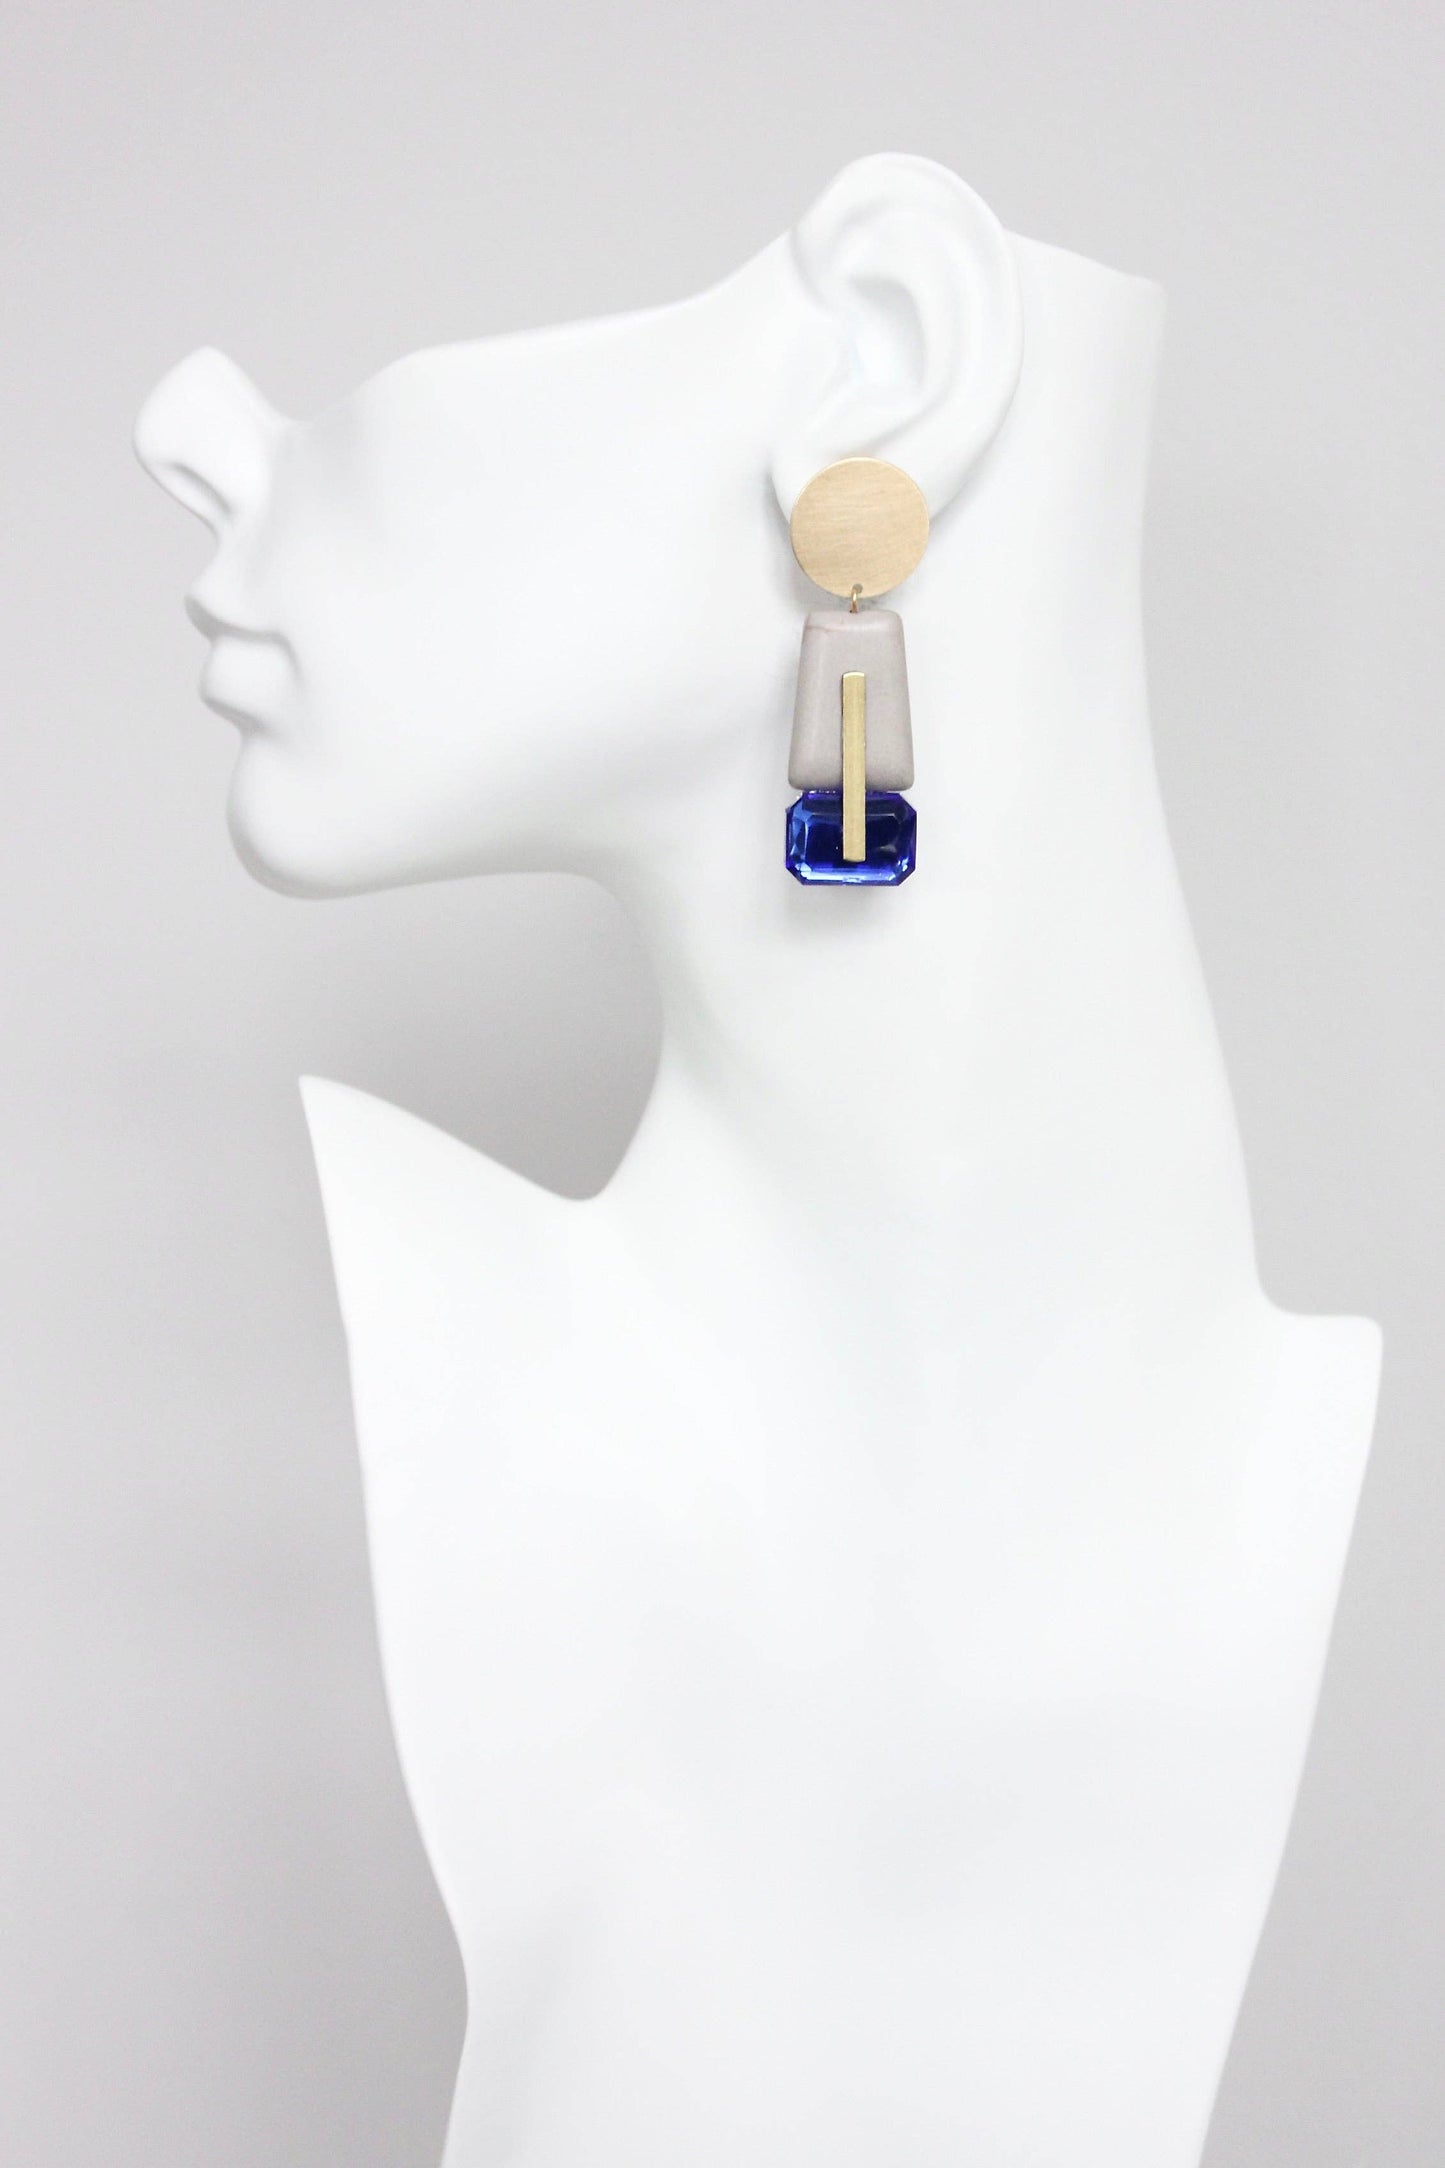 GNDE40 gray and blue post earrings